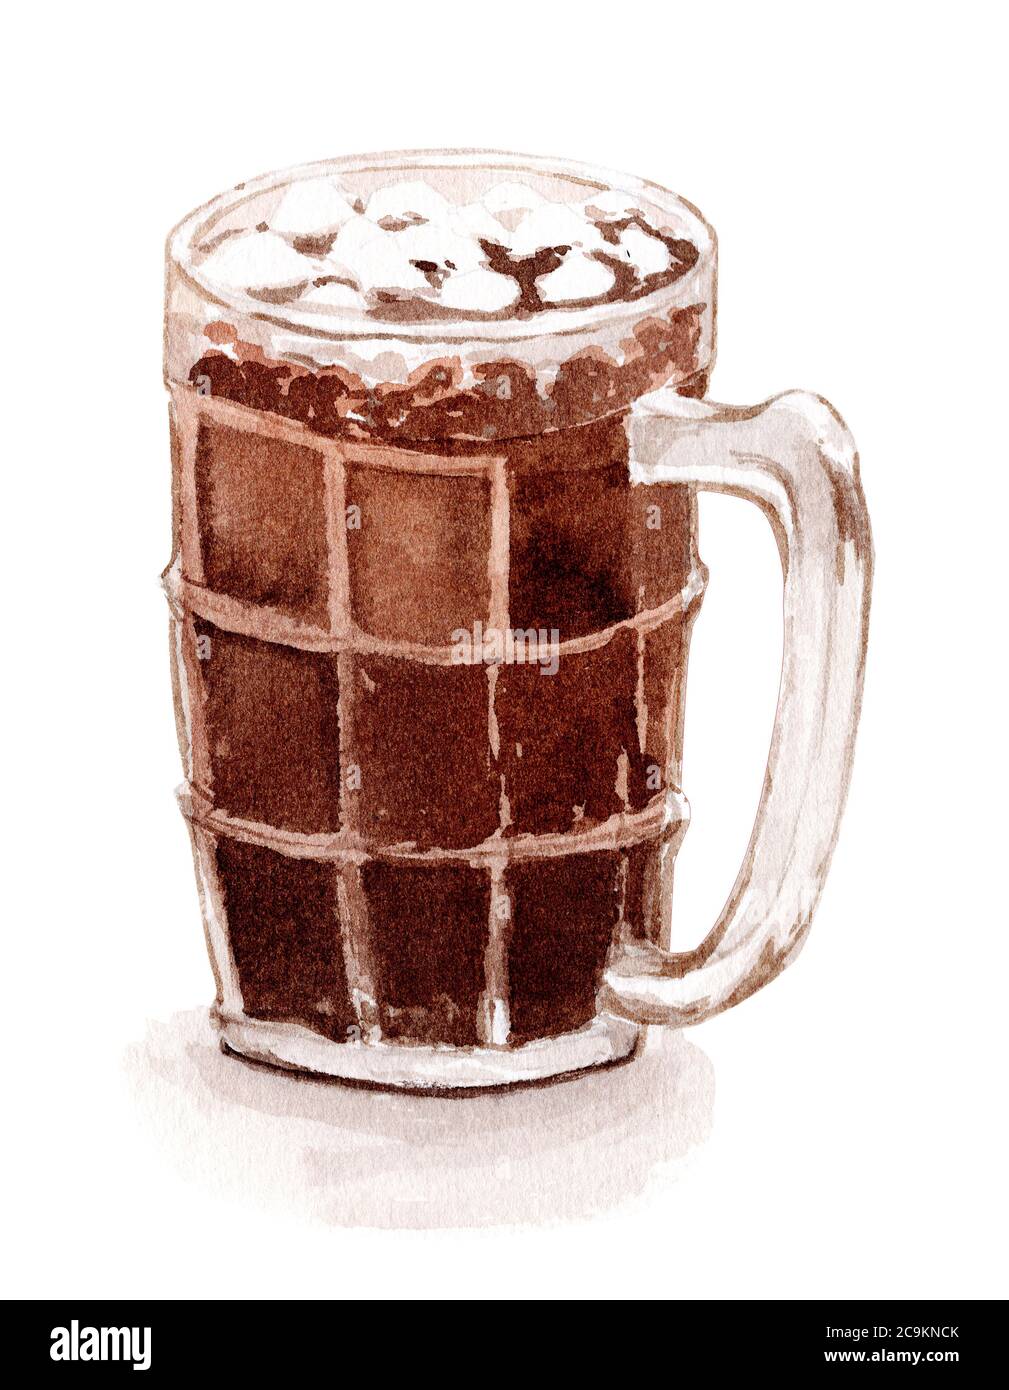 https://c8.alamy.com/comp/2C9KNCK/o-liang-iced-black-coffee-in-thai-local-style-popular-drinks-in-the-90s-watercolor-hand-painting-illustration-in-a-realistic-style-2C9KNCK.jpg